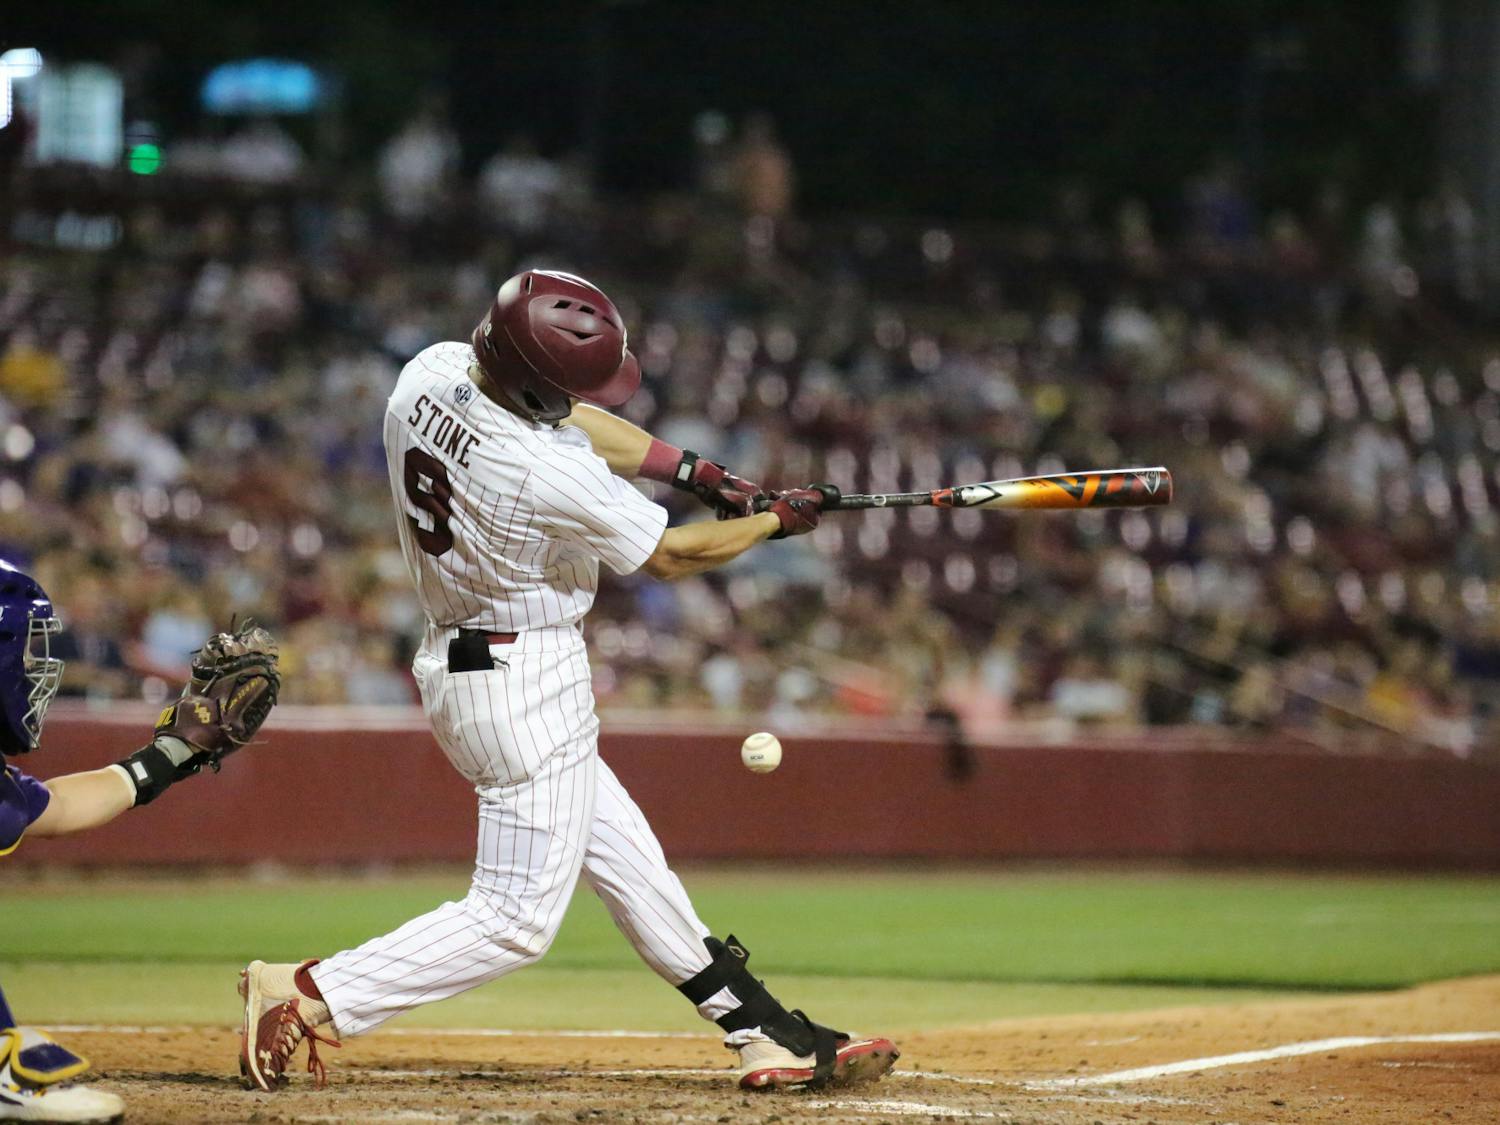 Sophomore outfielder Evan Stone swings at a pitch in hopes of getting on base for the Gamecocks and improving the lead against the LSU Tigers. No. 6 South Carolina won the first game of a two-game series 13-5 against No. 1 LSU on April 6, 2023.